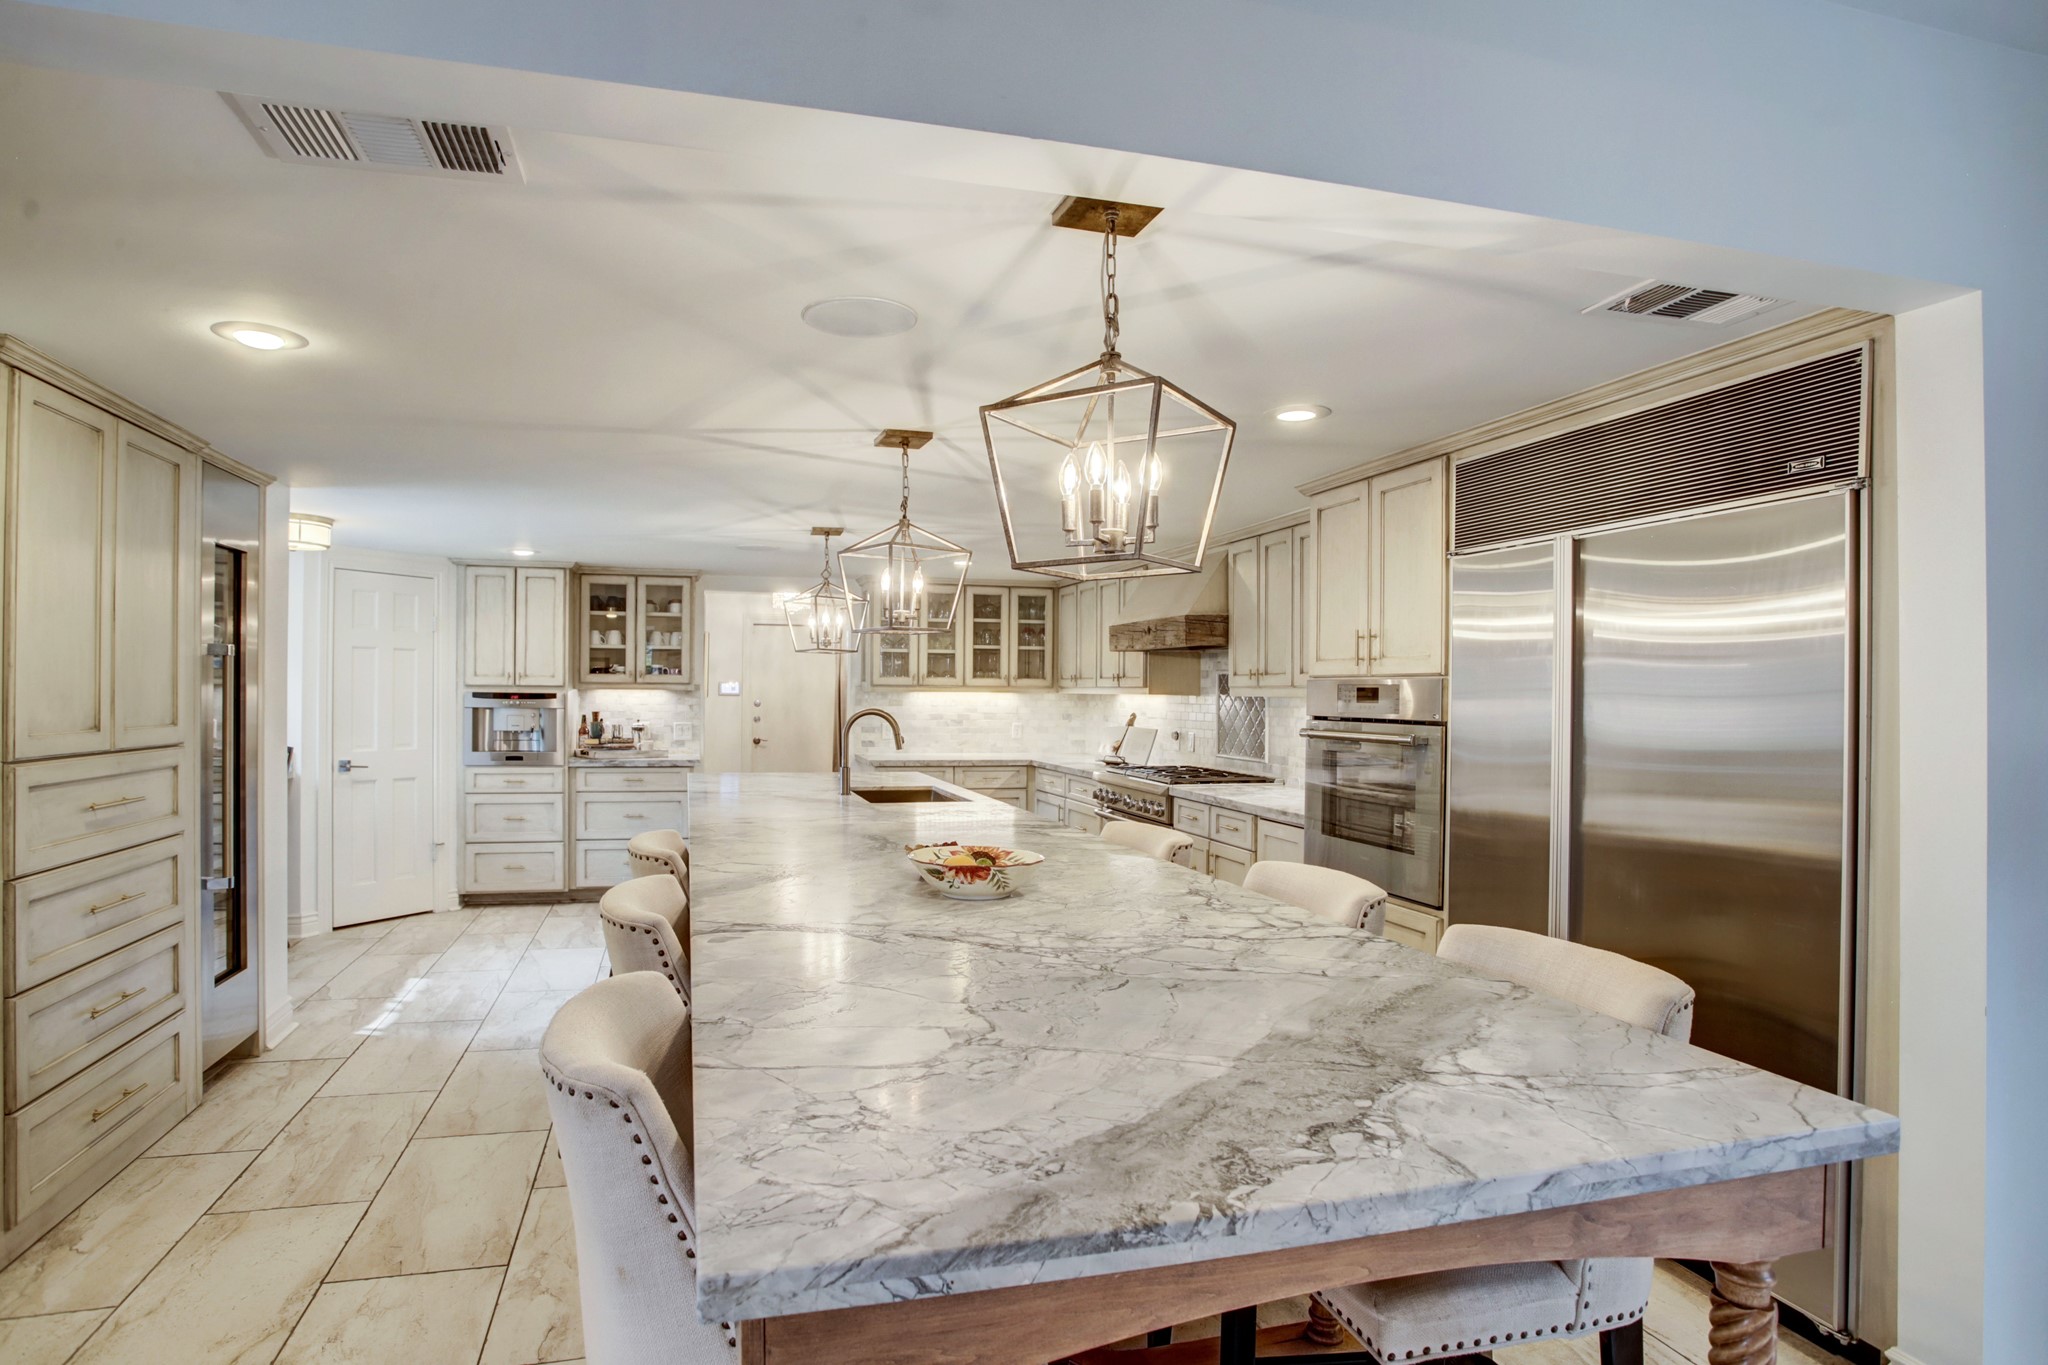 Grand island kitchen with stainless steel appliances and  quartzite counter tops is a chef's dream